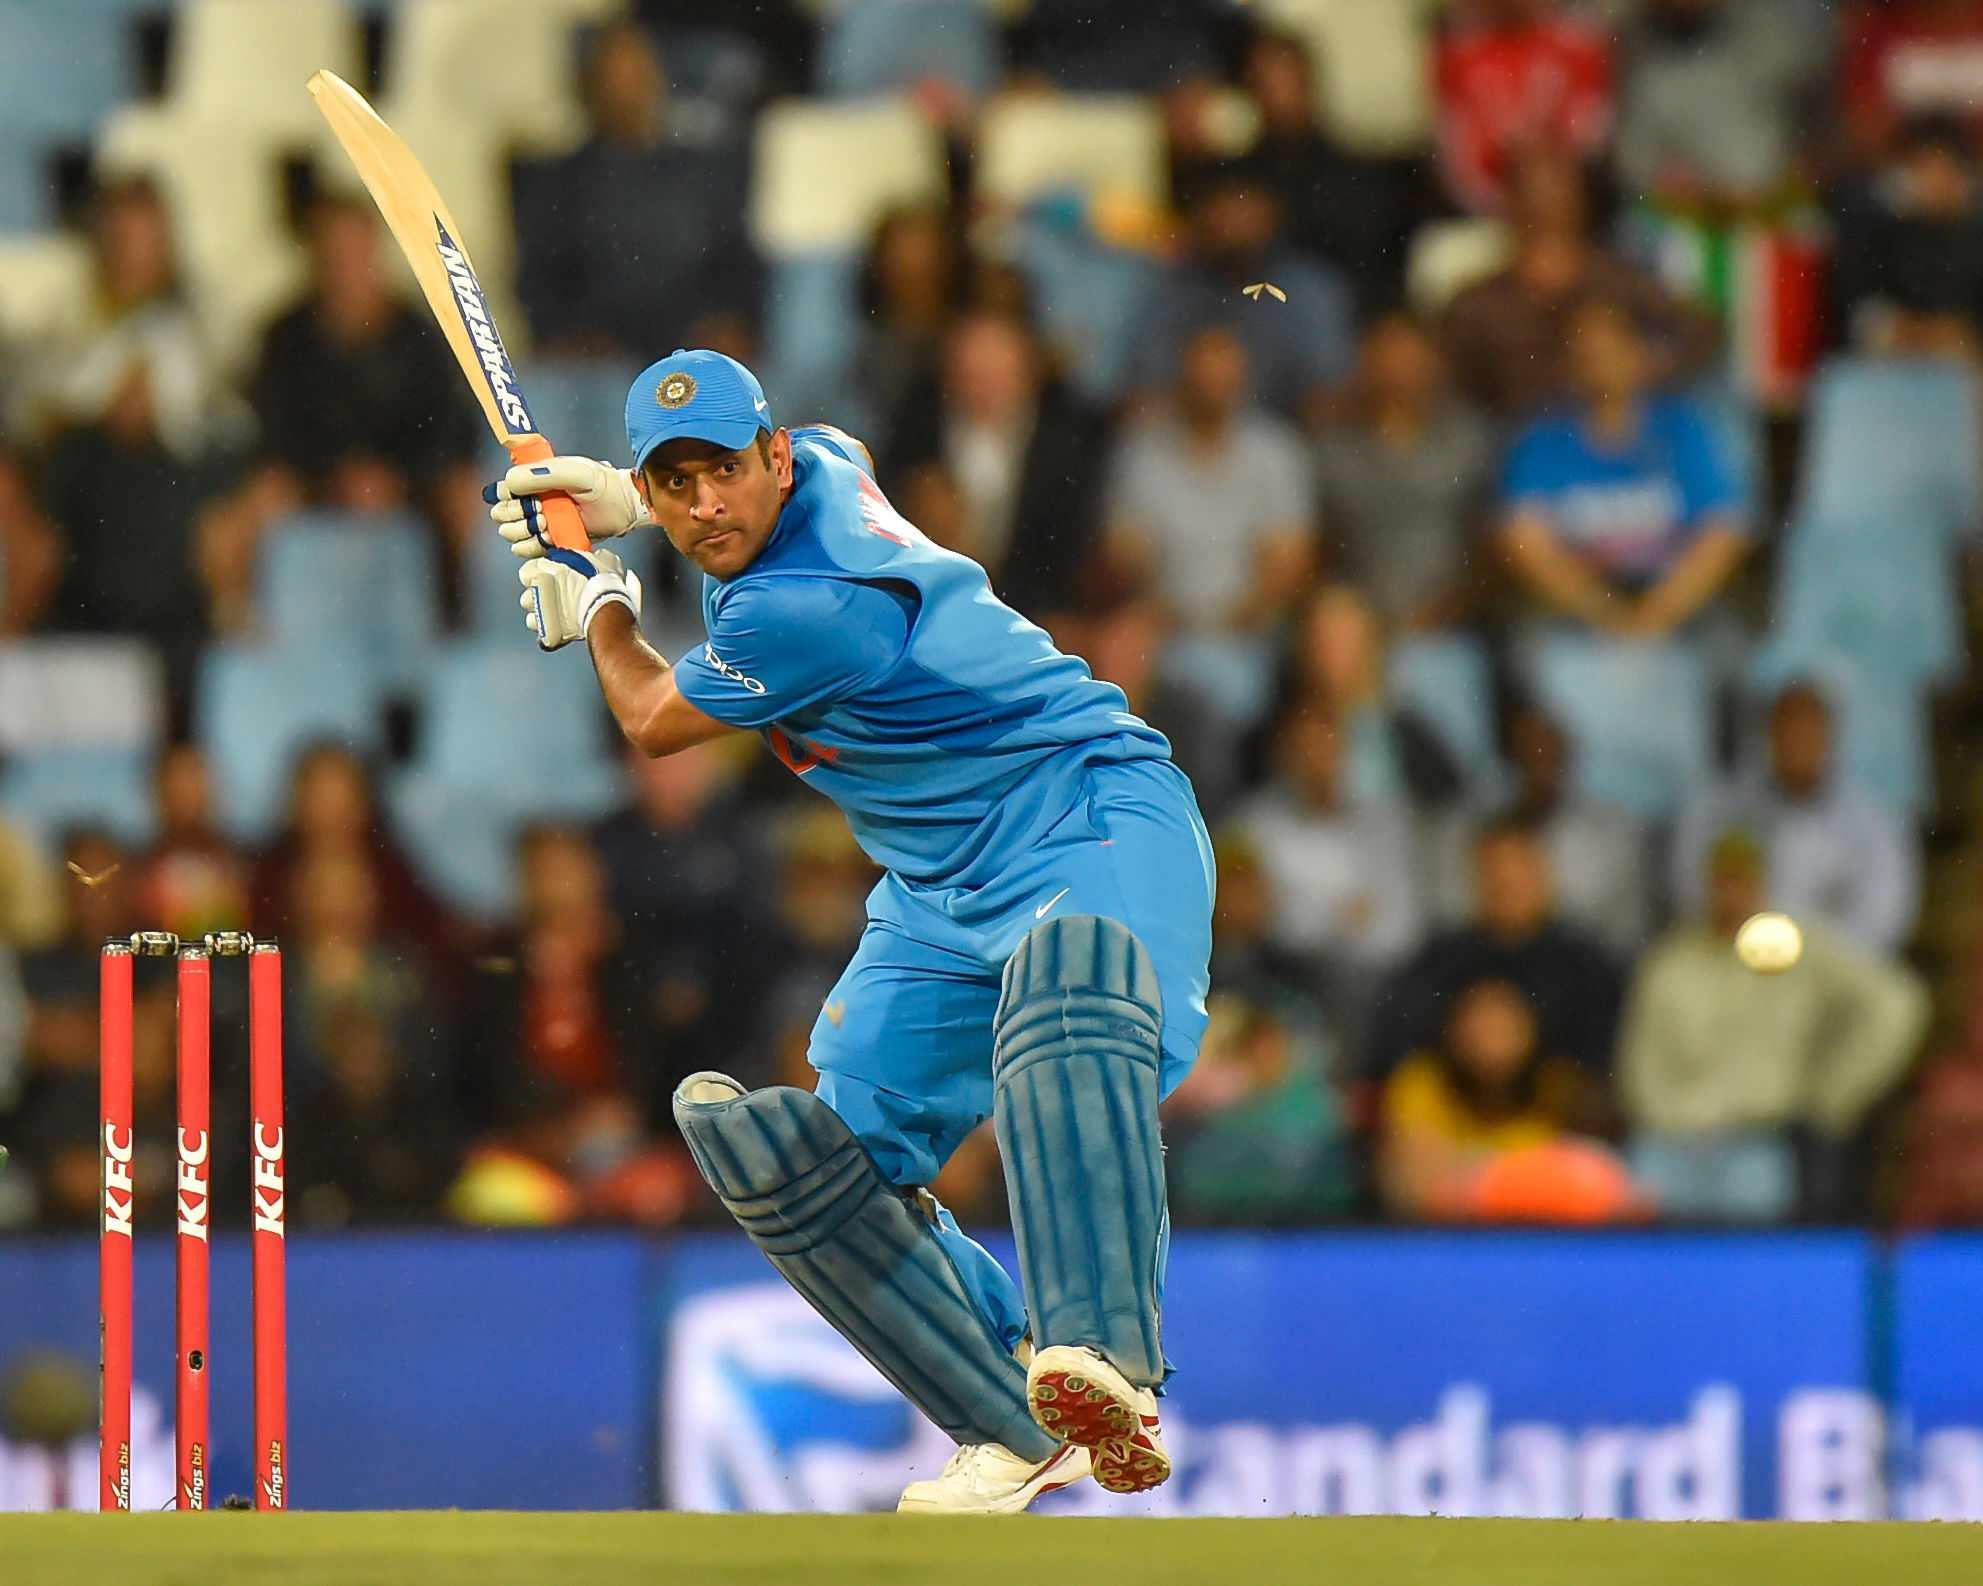 ‘Neither India won, nor MS Dhoni did well’: Cricket commentator Aakash Chopra